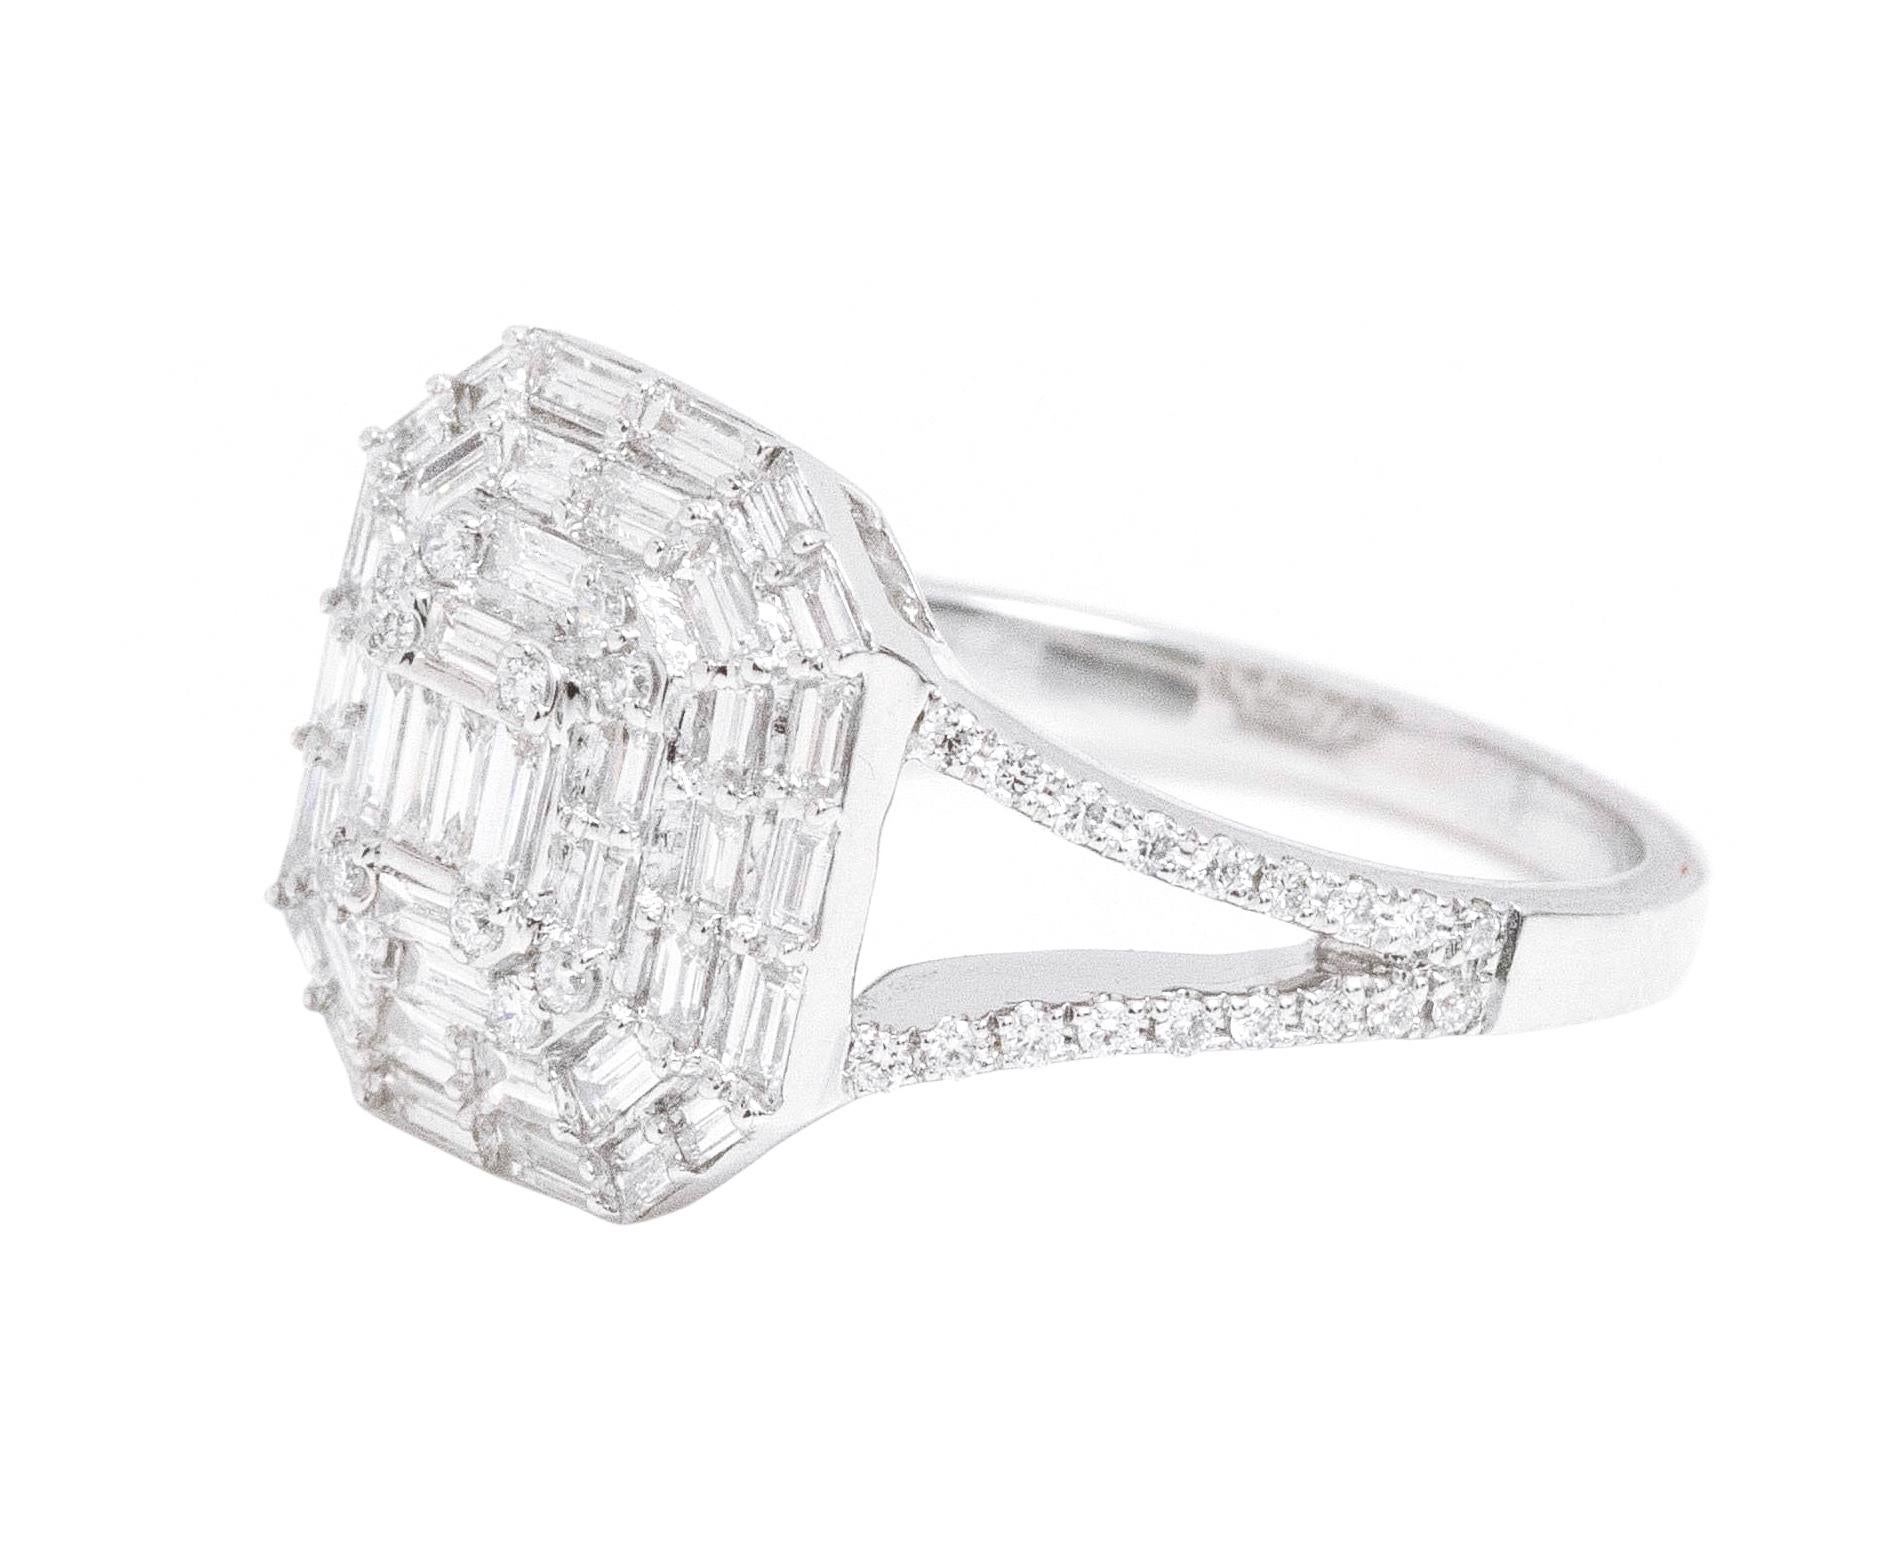 18 Karat White Gold 1.12 Carat Diamond Contemporary-Style Ring

This incredible emerald cut diamond invisible setting engagement ring is exemplary. The center invisible setting diamond emerald cut is a crafty design wherein 5 smaller baguette cut